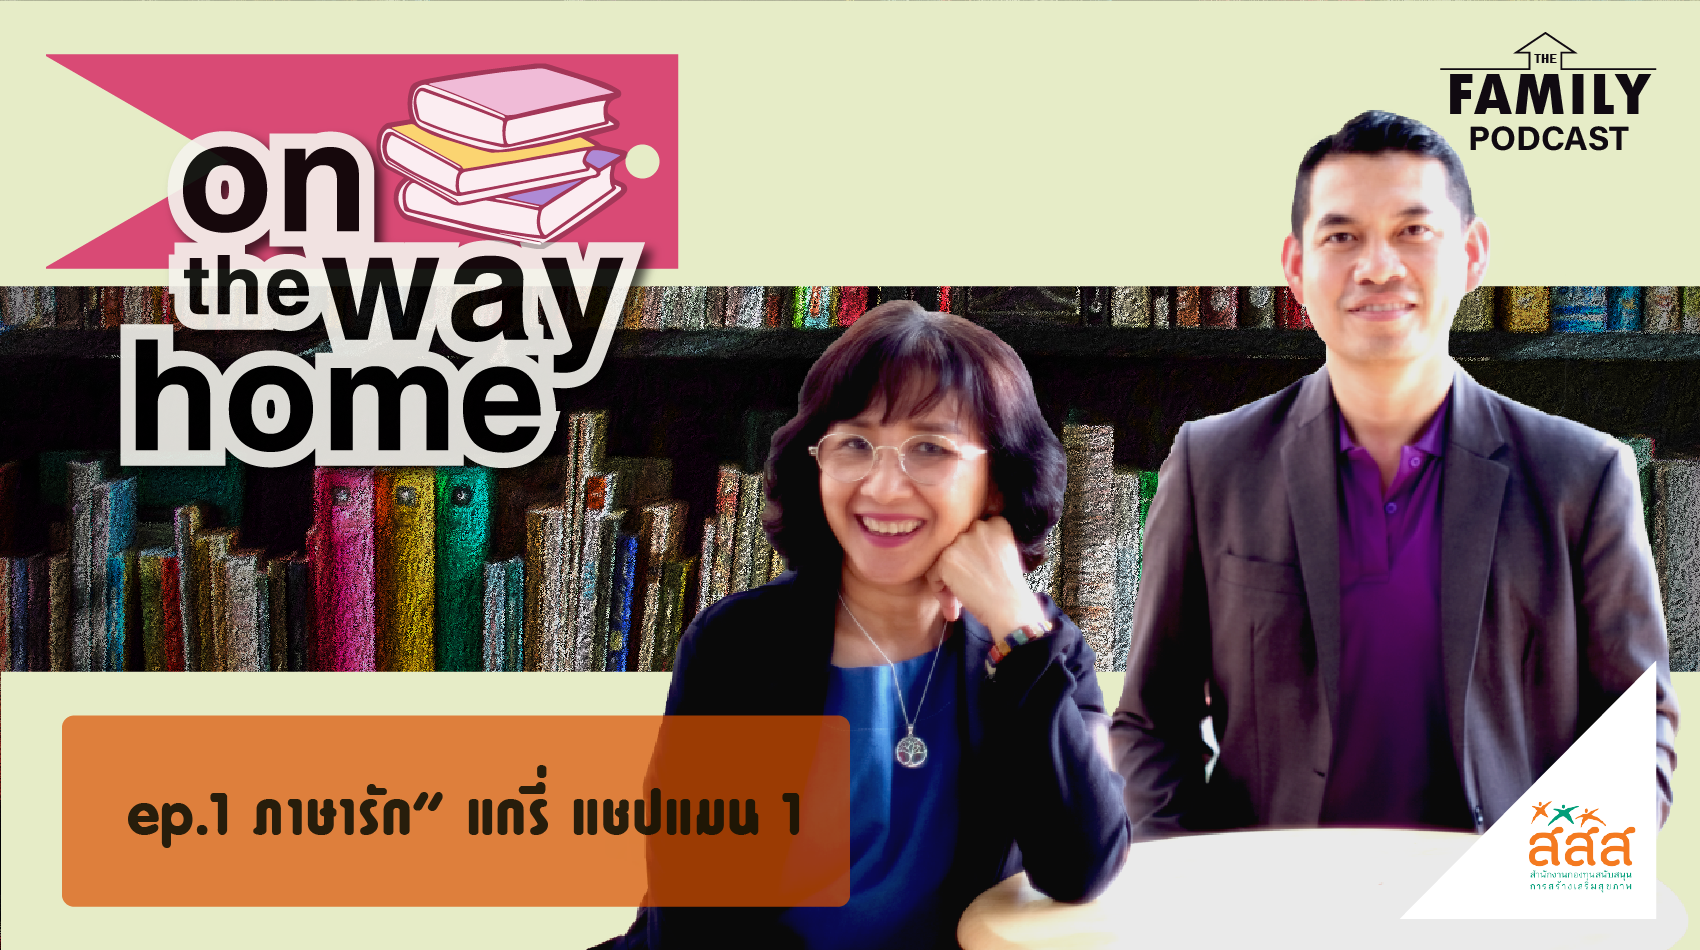 The Family Podcast On the Way Home EP.01 ภาษารัก แกรี่ แชปแมน 1